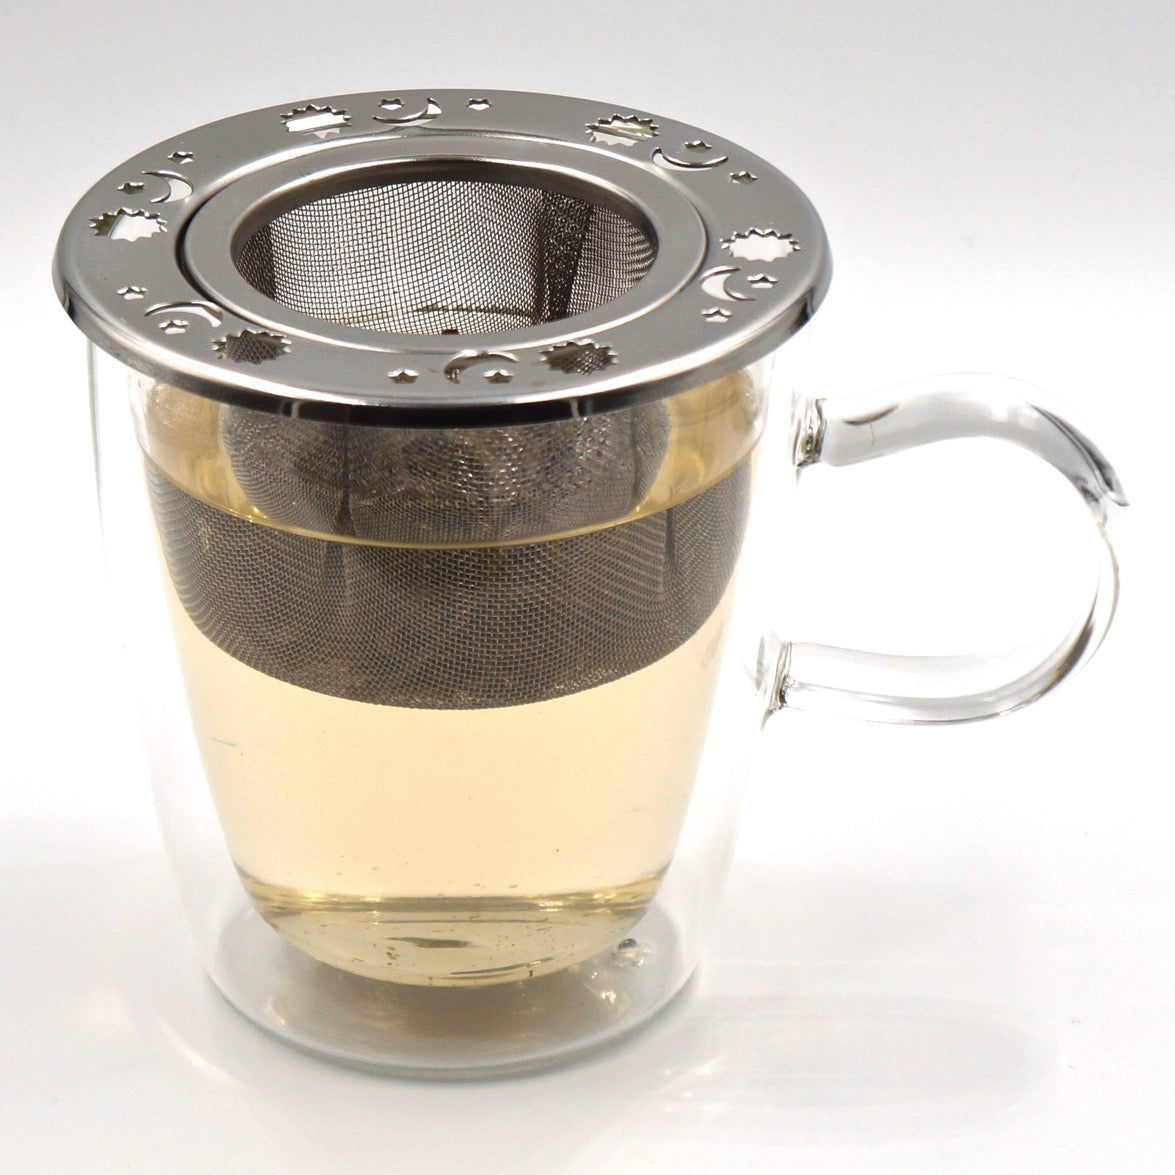 Norpro decorative tea infuser front in-use view